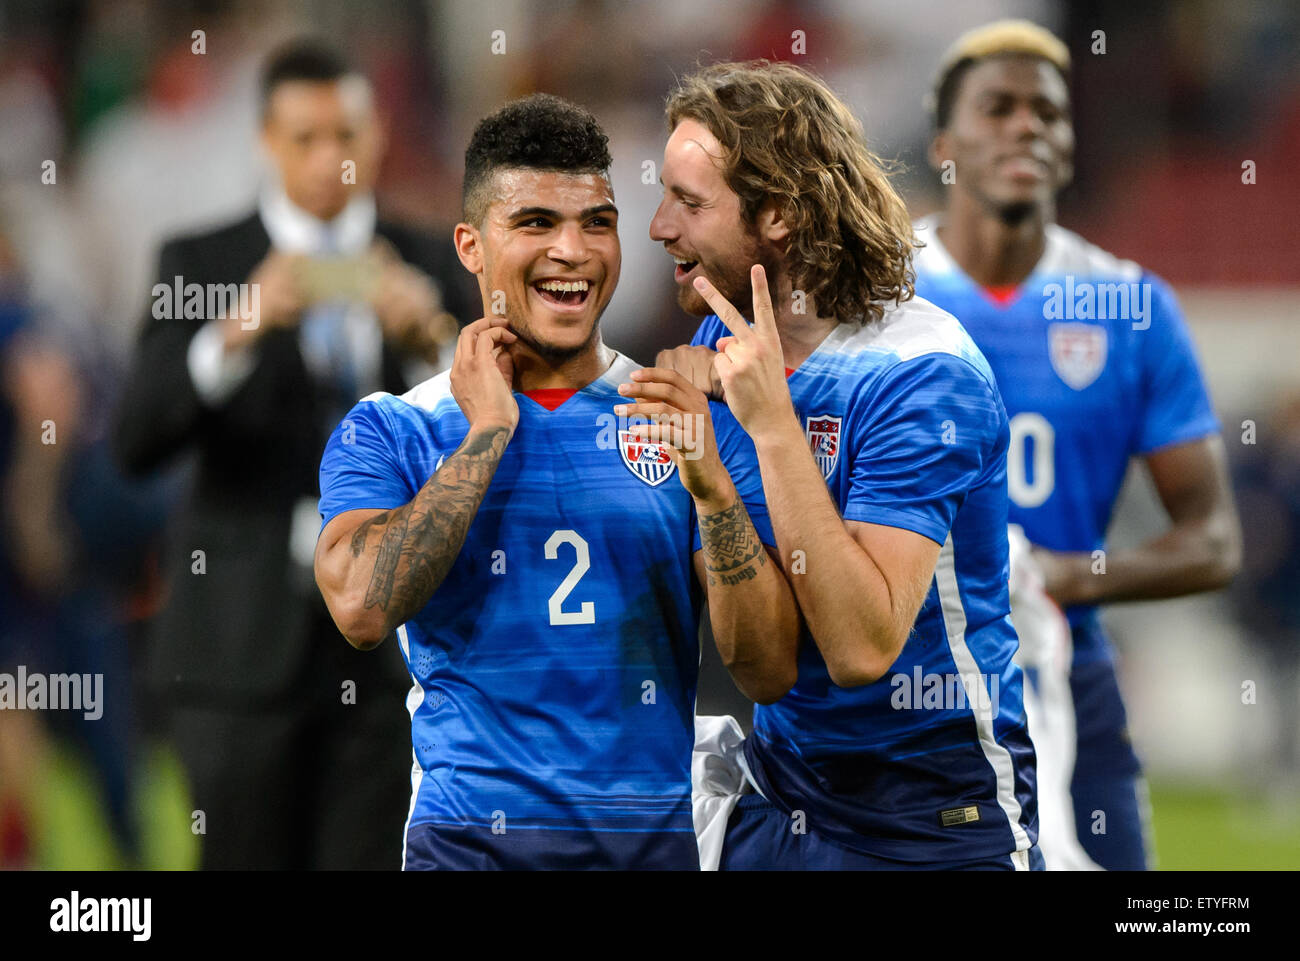 Cologne, Germany. 10th June, 2015. DeAndre Yedlin (L) and Mix Diskerud of the USA celebrate after the international friendly soccer match between Germany and the USA at RheinEnergieStadion in Cologne, Germany, 10 June 2015. The USA won the match 2-1. Photo: Thomas Eisenhuth/dpa - NO WIRE SERVICE -/dpa/Alamy Live News Stock Photo